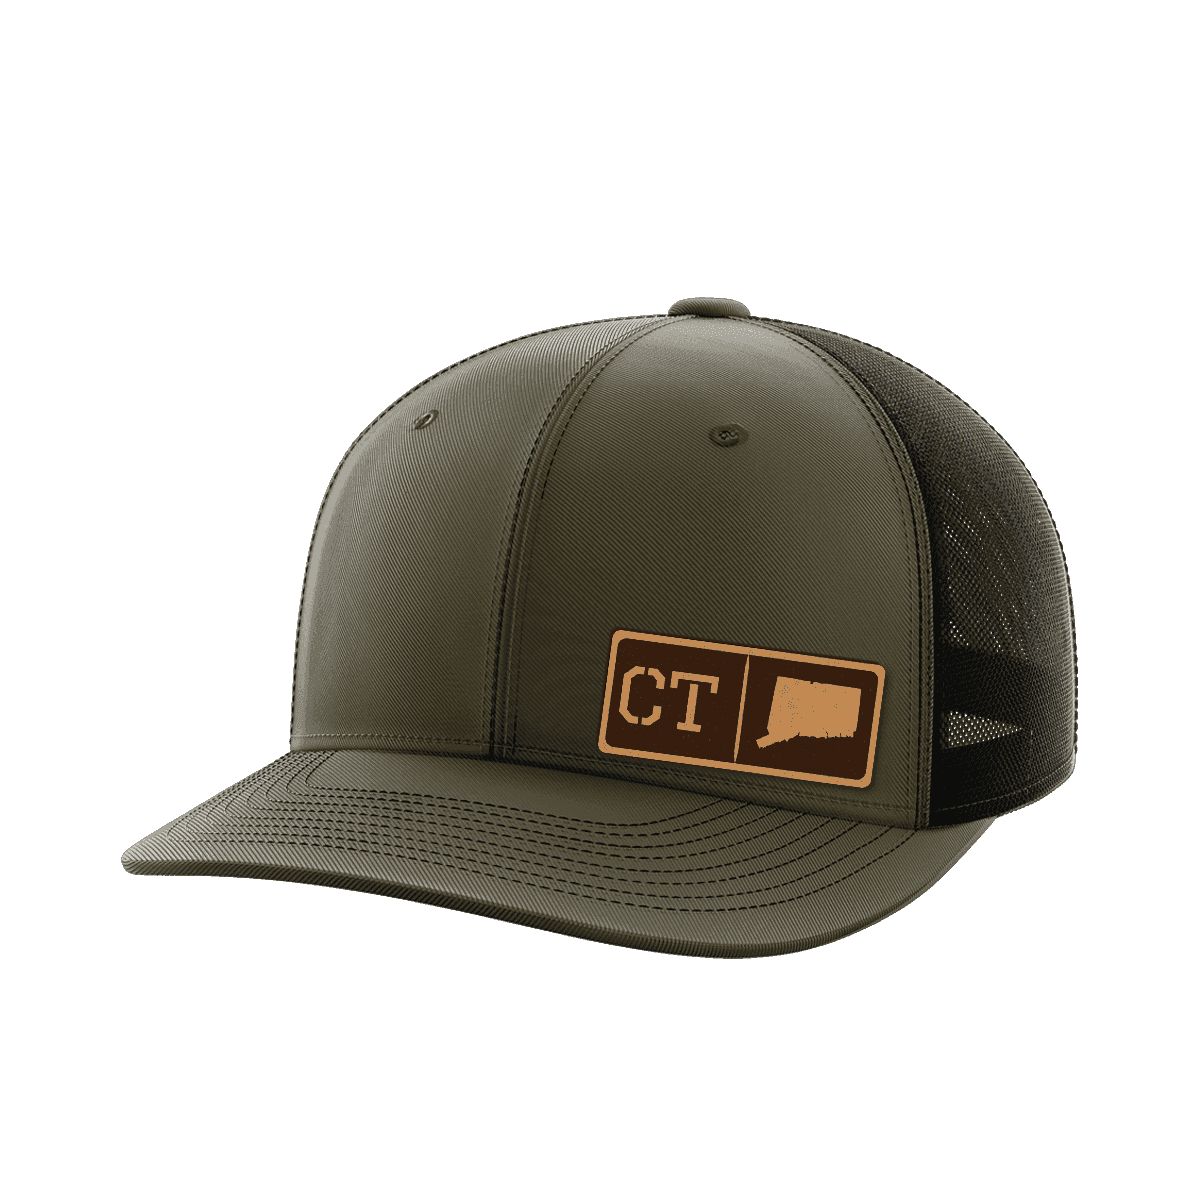 Thumbnail for Connecticut Homegrown Hats - Greater Half